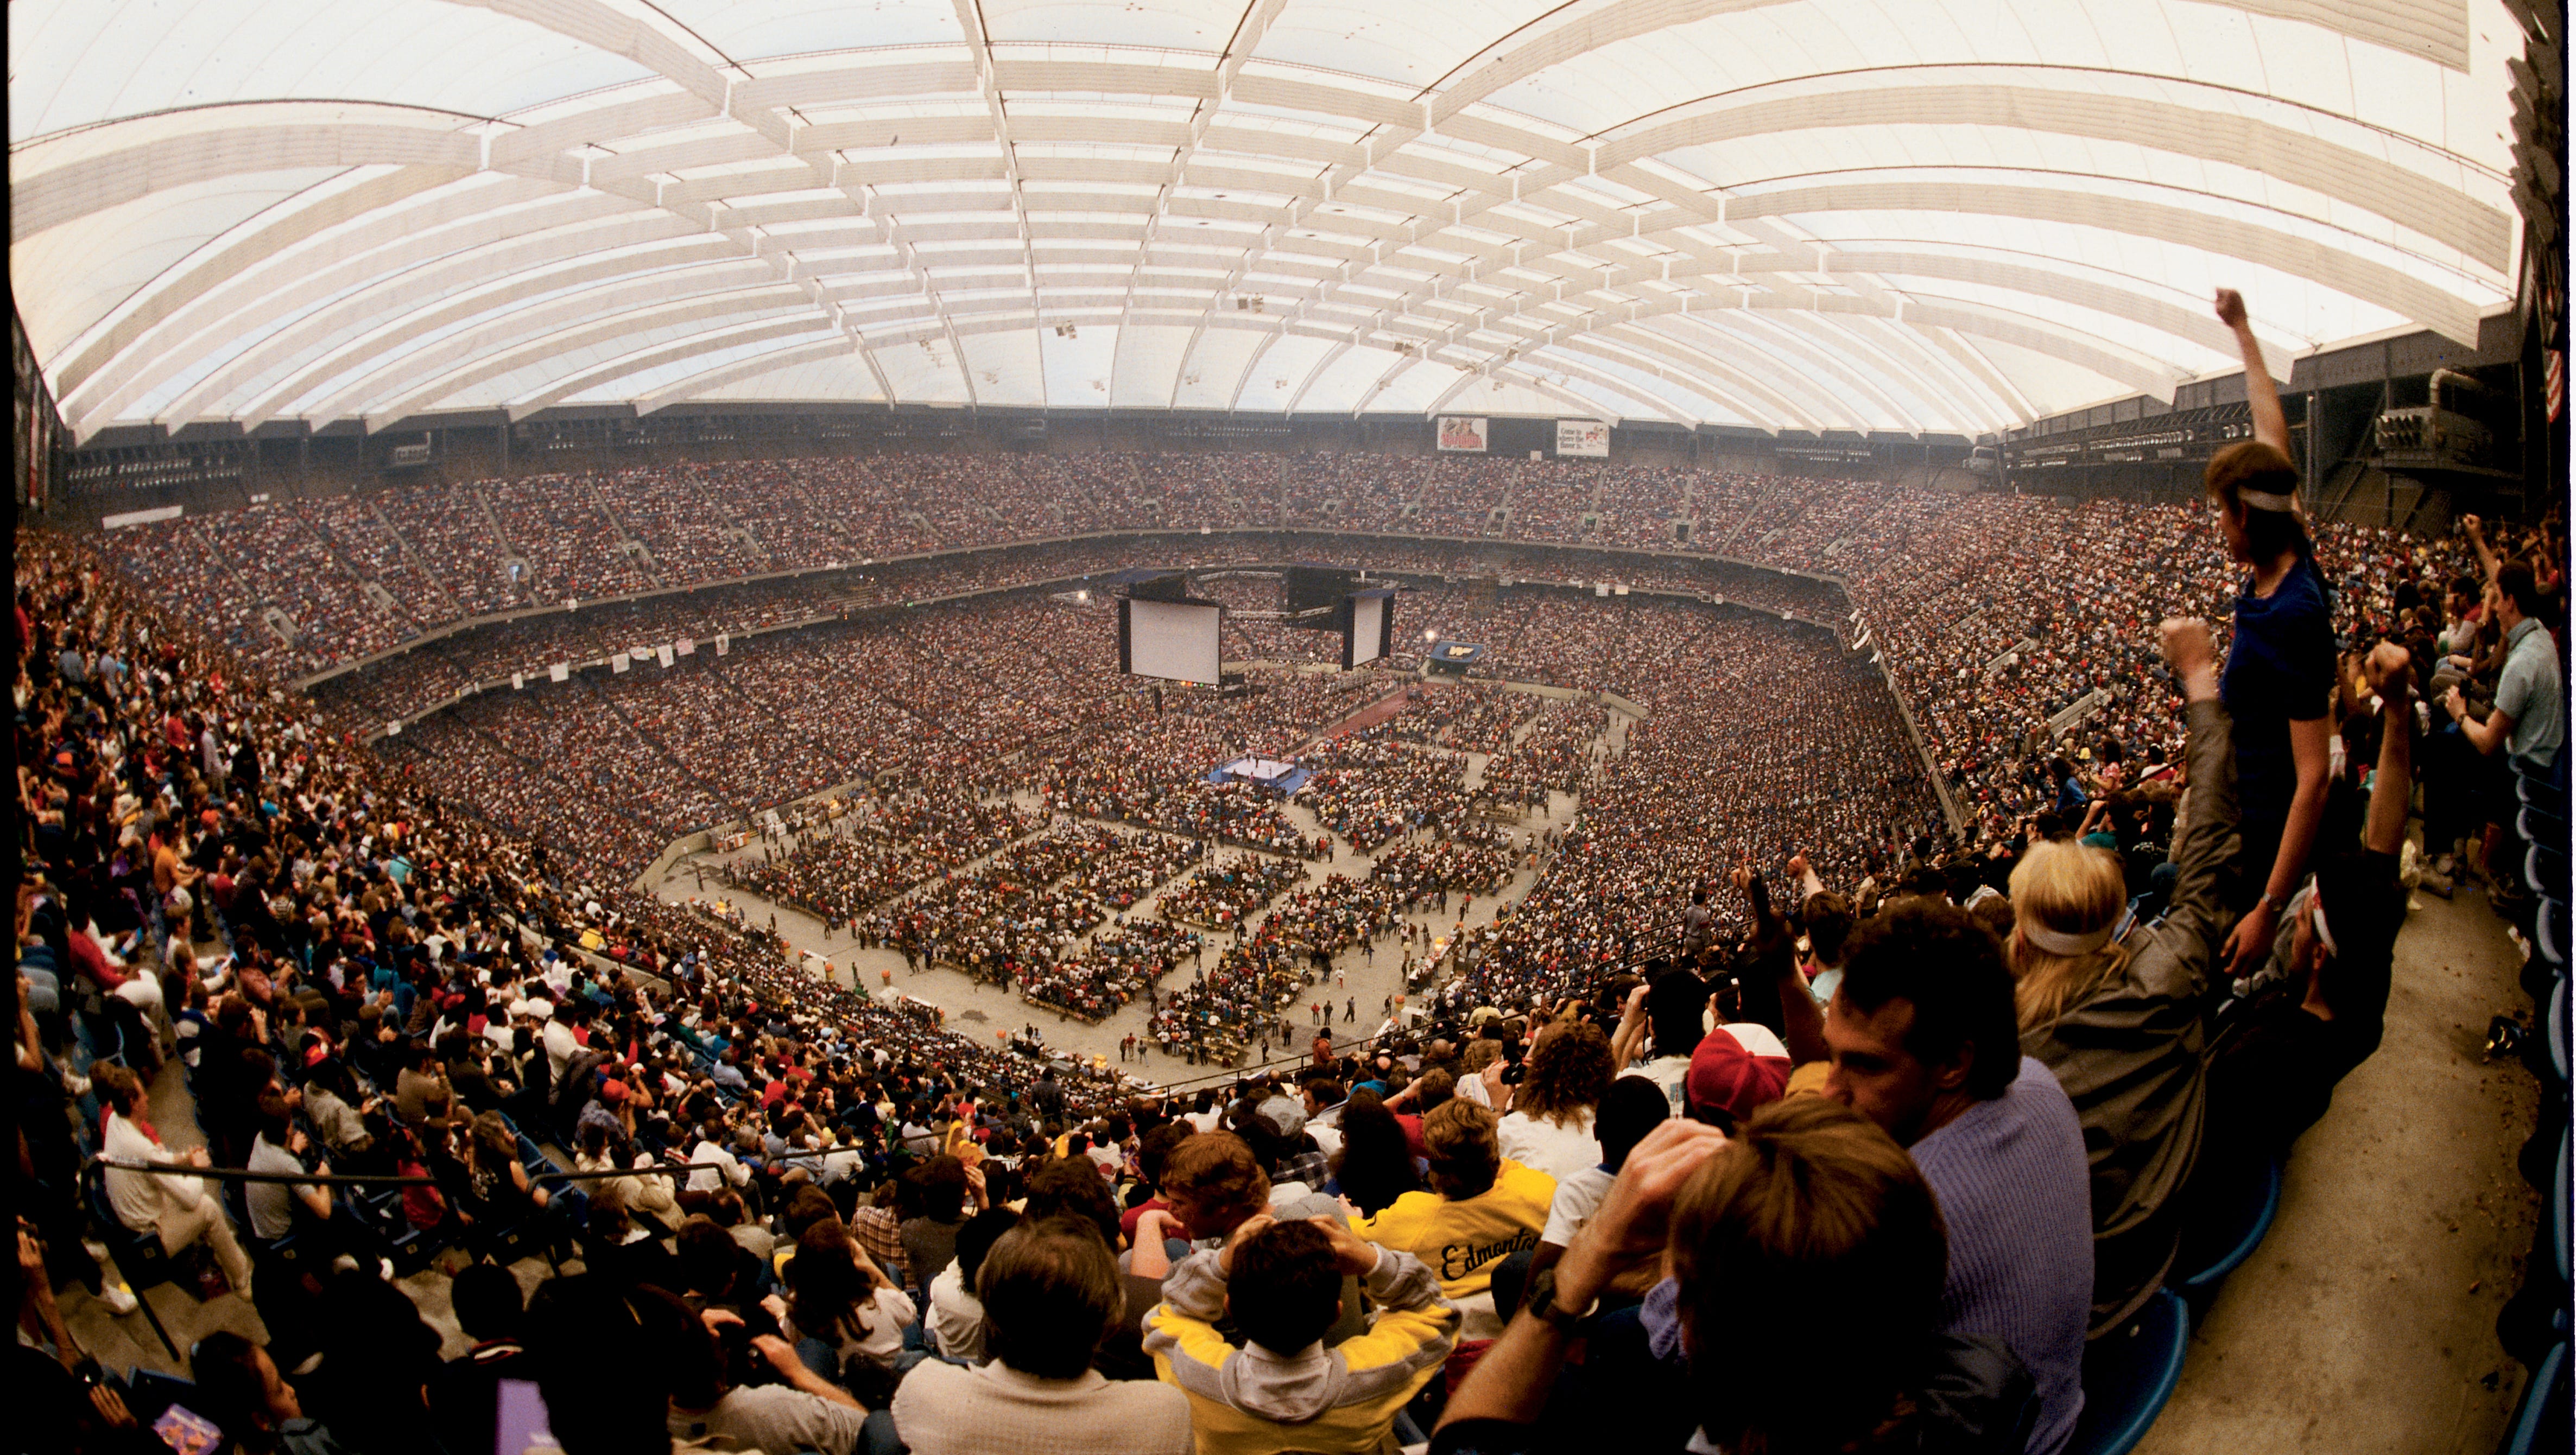 The announced attendance at the Silverdome for WrestleMania III 93,173, at the time considered the largest crowd ever for an indoor sporting event.